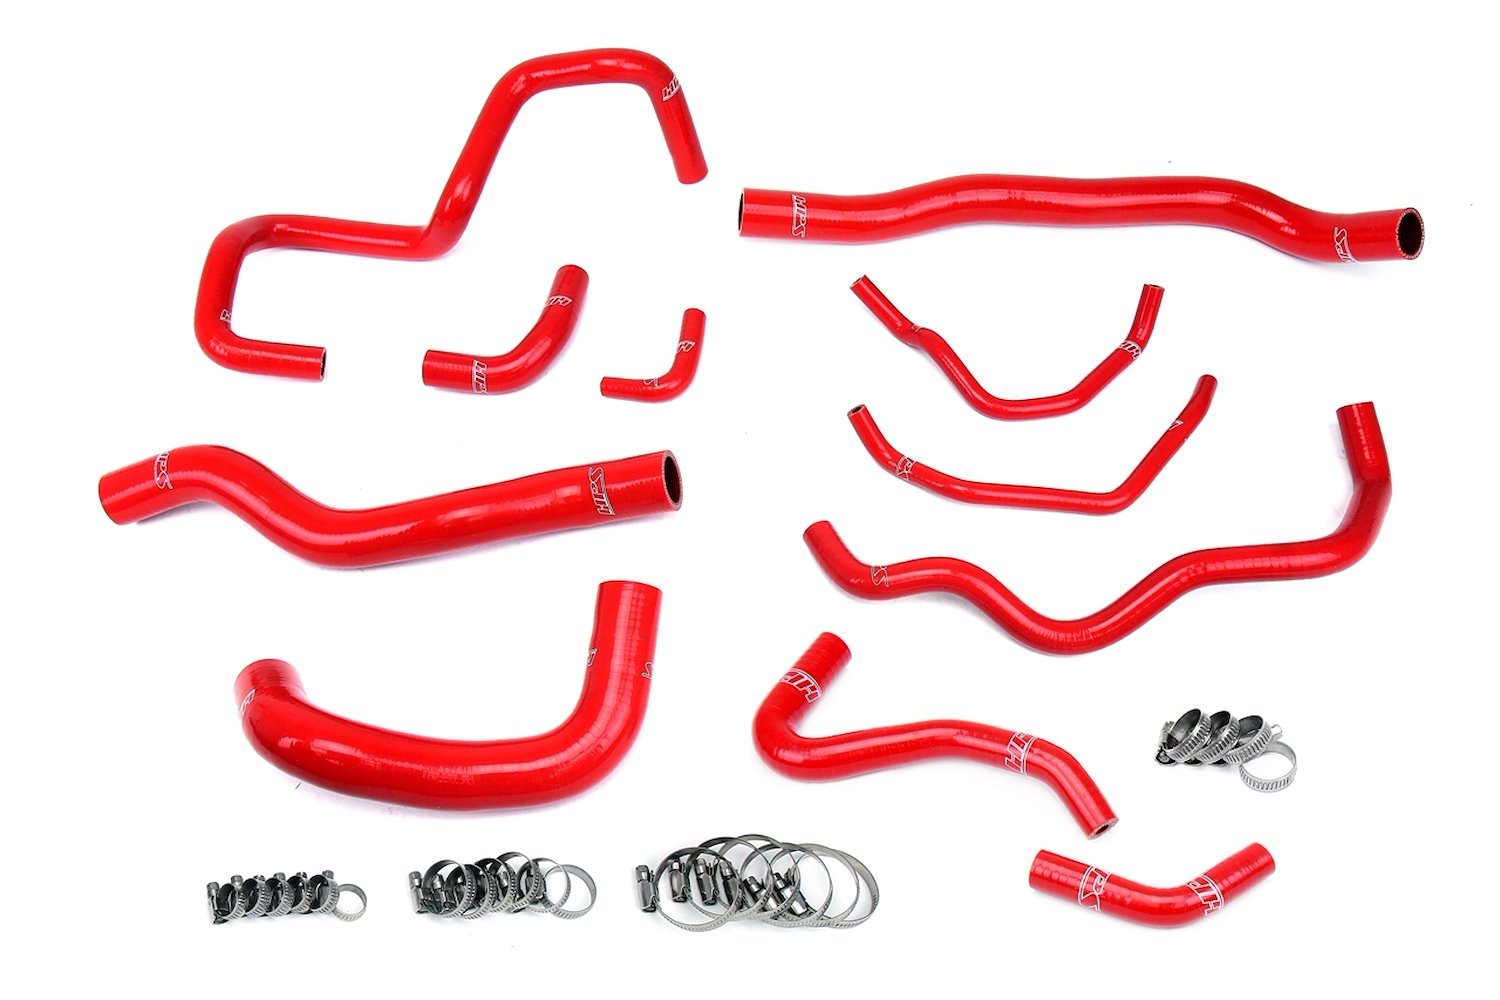 57-1876-RED Coolant Hose Kit, 3-Ply Reinforced Silicone, Replaces Rubber Coolant Hoses